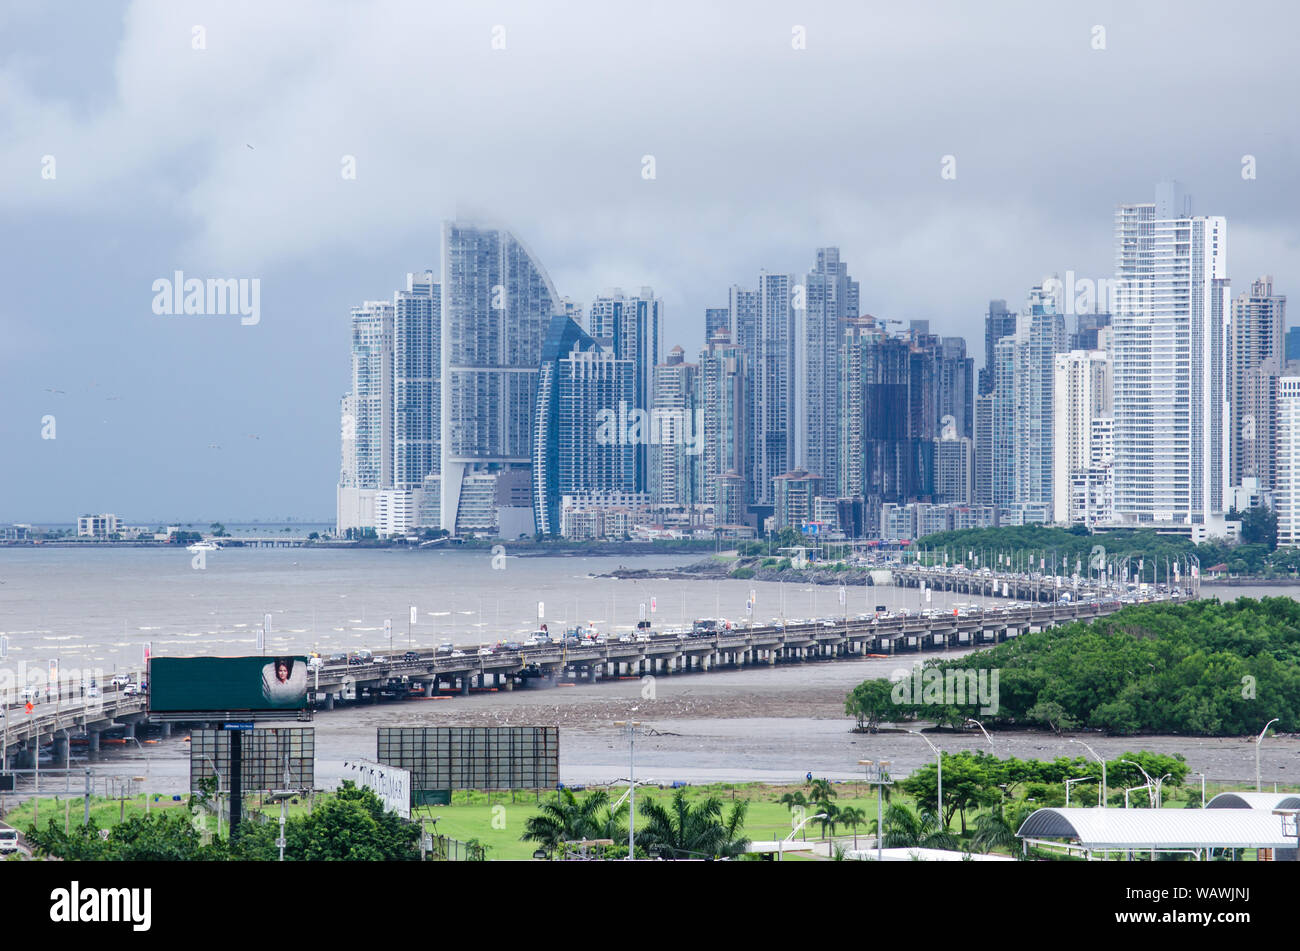 Panama City skyline as seen from Costa del Este neighborhood. The South Corridor that connects the city centre with tocumen airport is also seen. Stock Photo